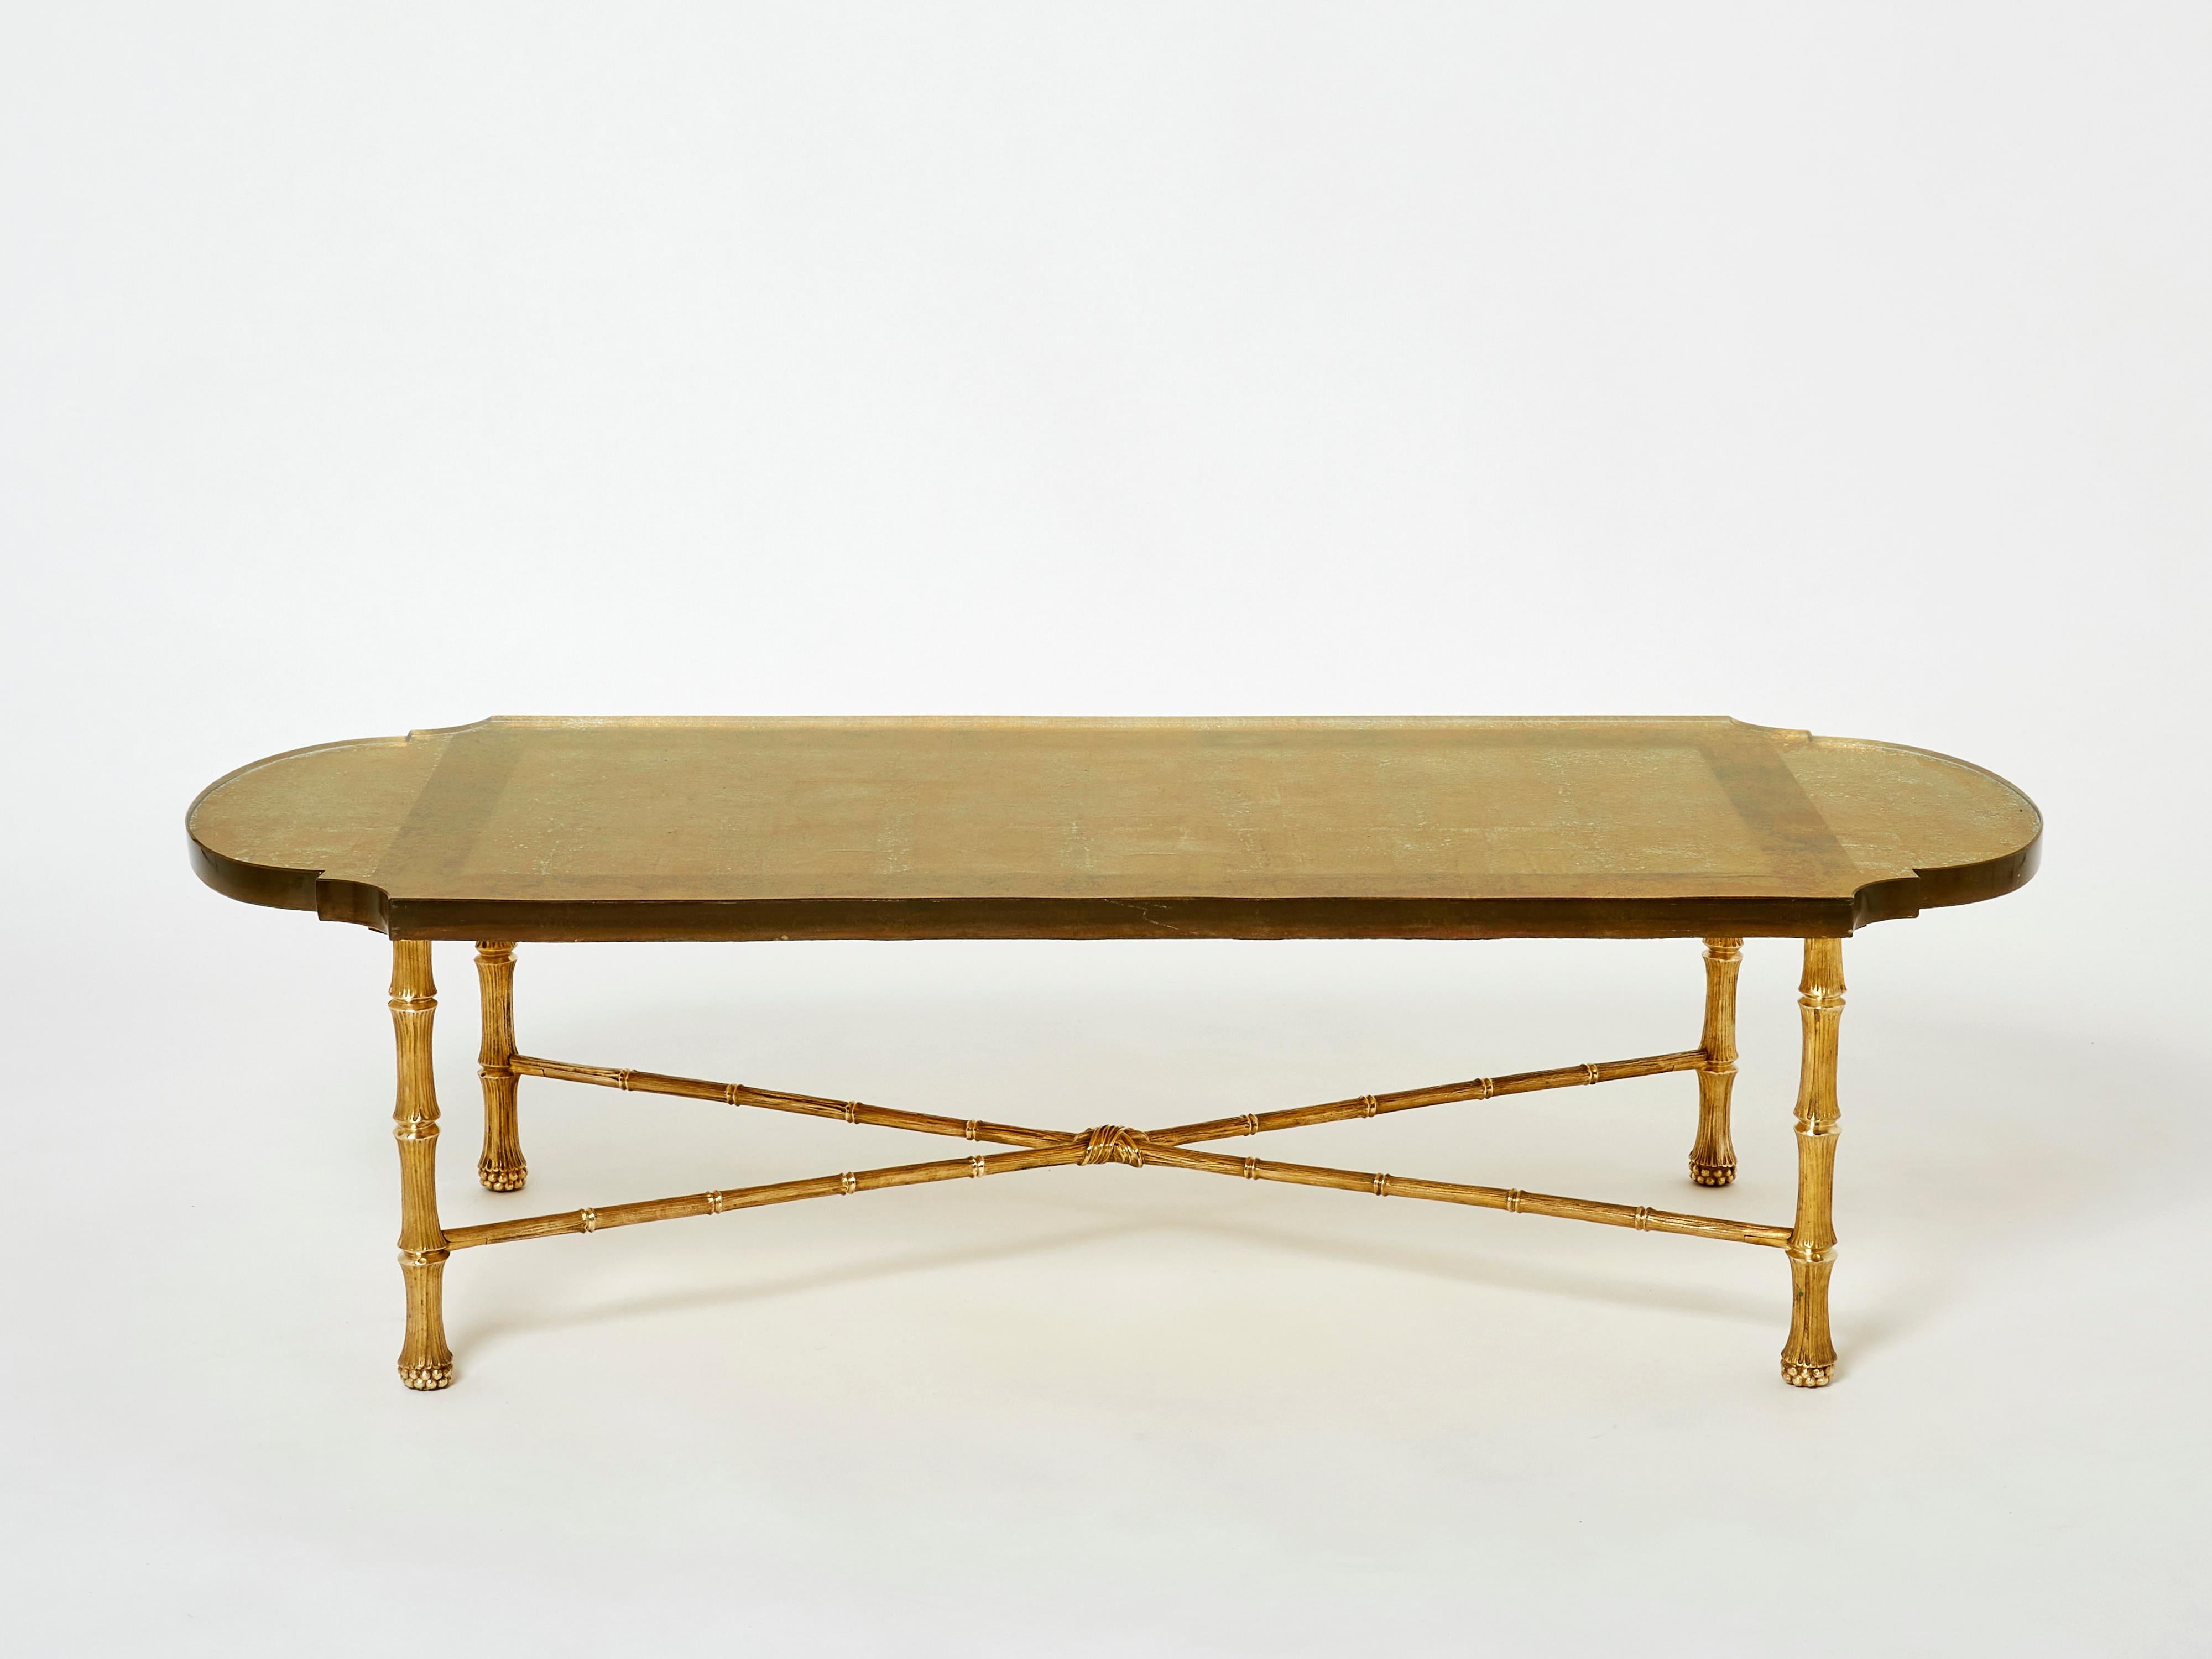 This beautiful coffee table by French house Maison Baguès was created in the early 1950s with solid bamboo shaped bronze structure and an amazing Saint Gobain dalle de sable gilded top. The thick Neoclassical shaped glass top gilded with gold leaf